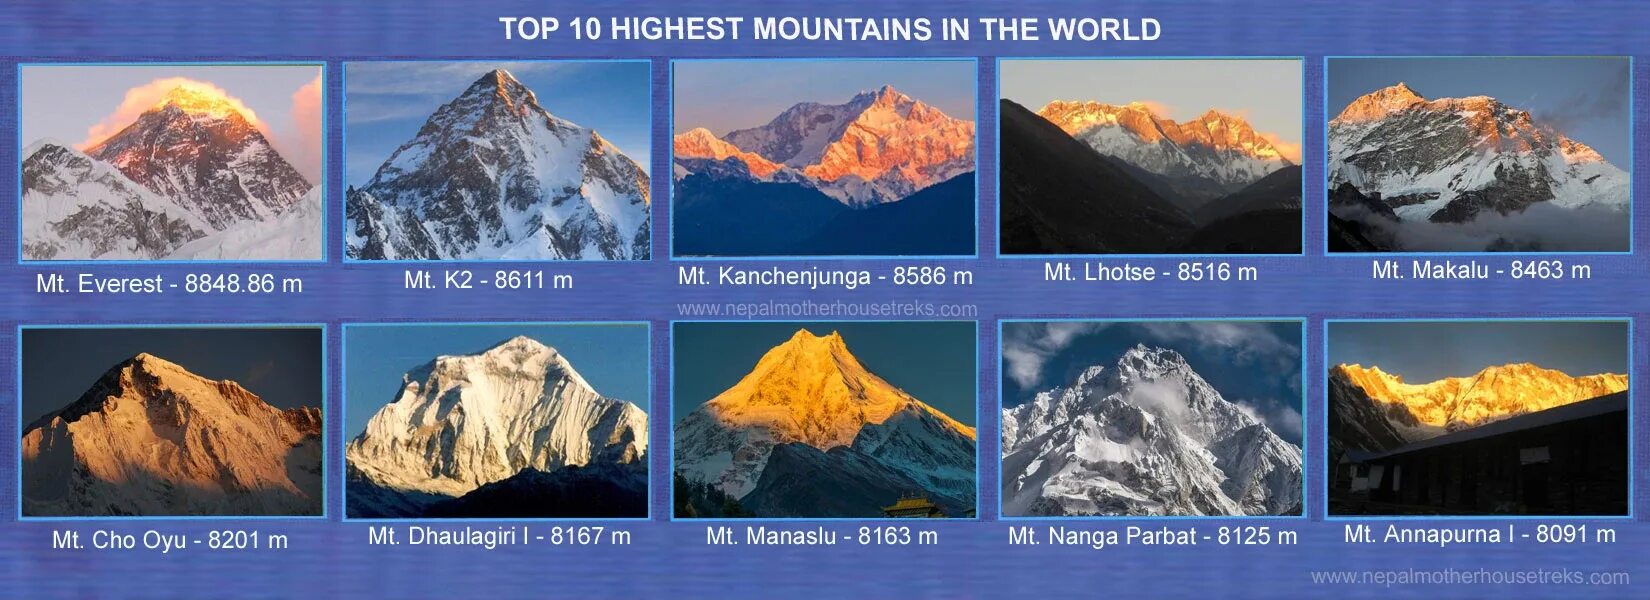 The Highest Mountain in the World. The Tallest Mountain in the World. Top 10 Highest Mountains. Mount Everest is High Mountain in the World.